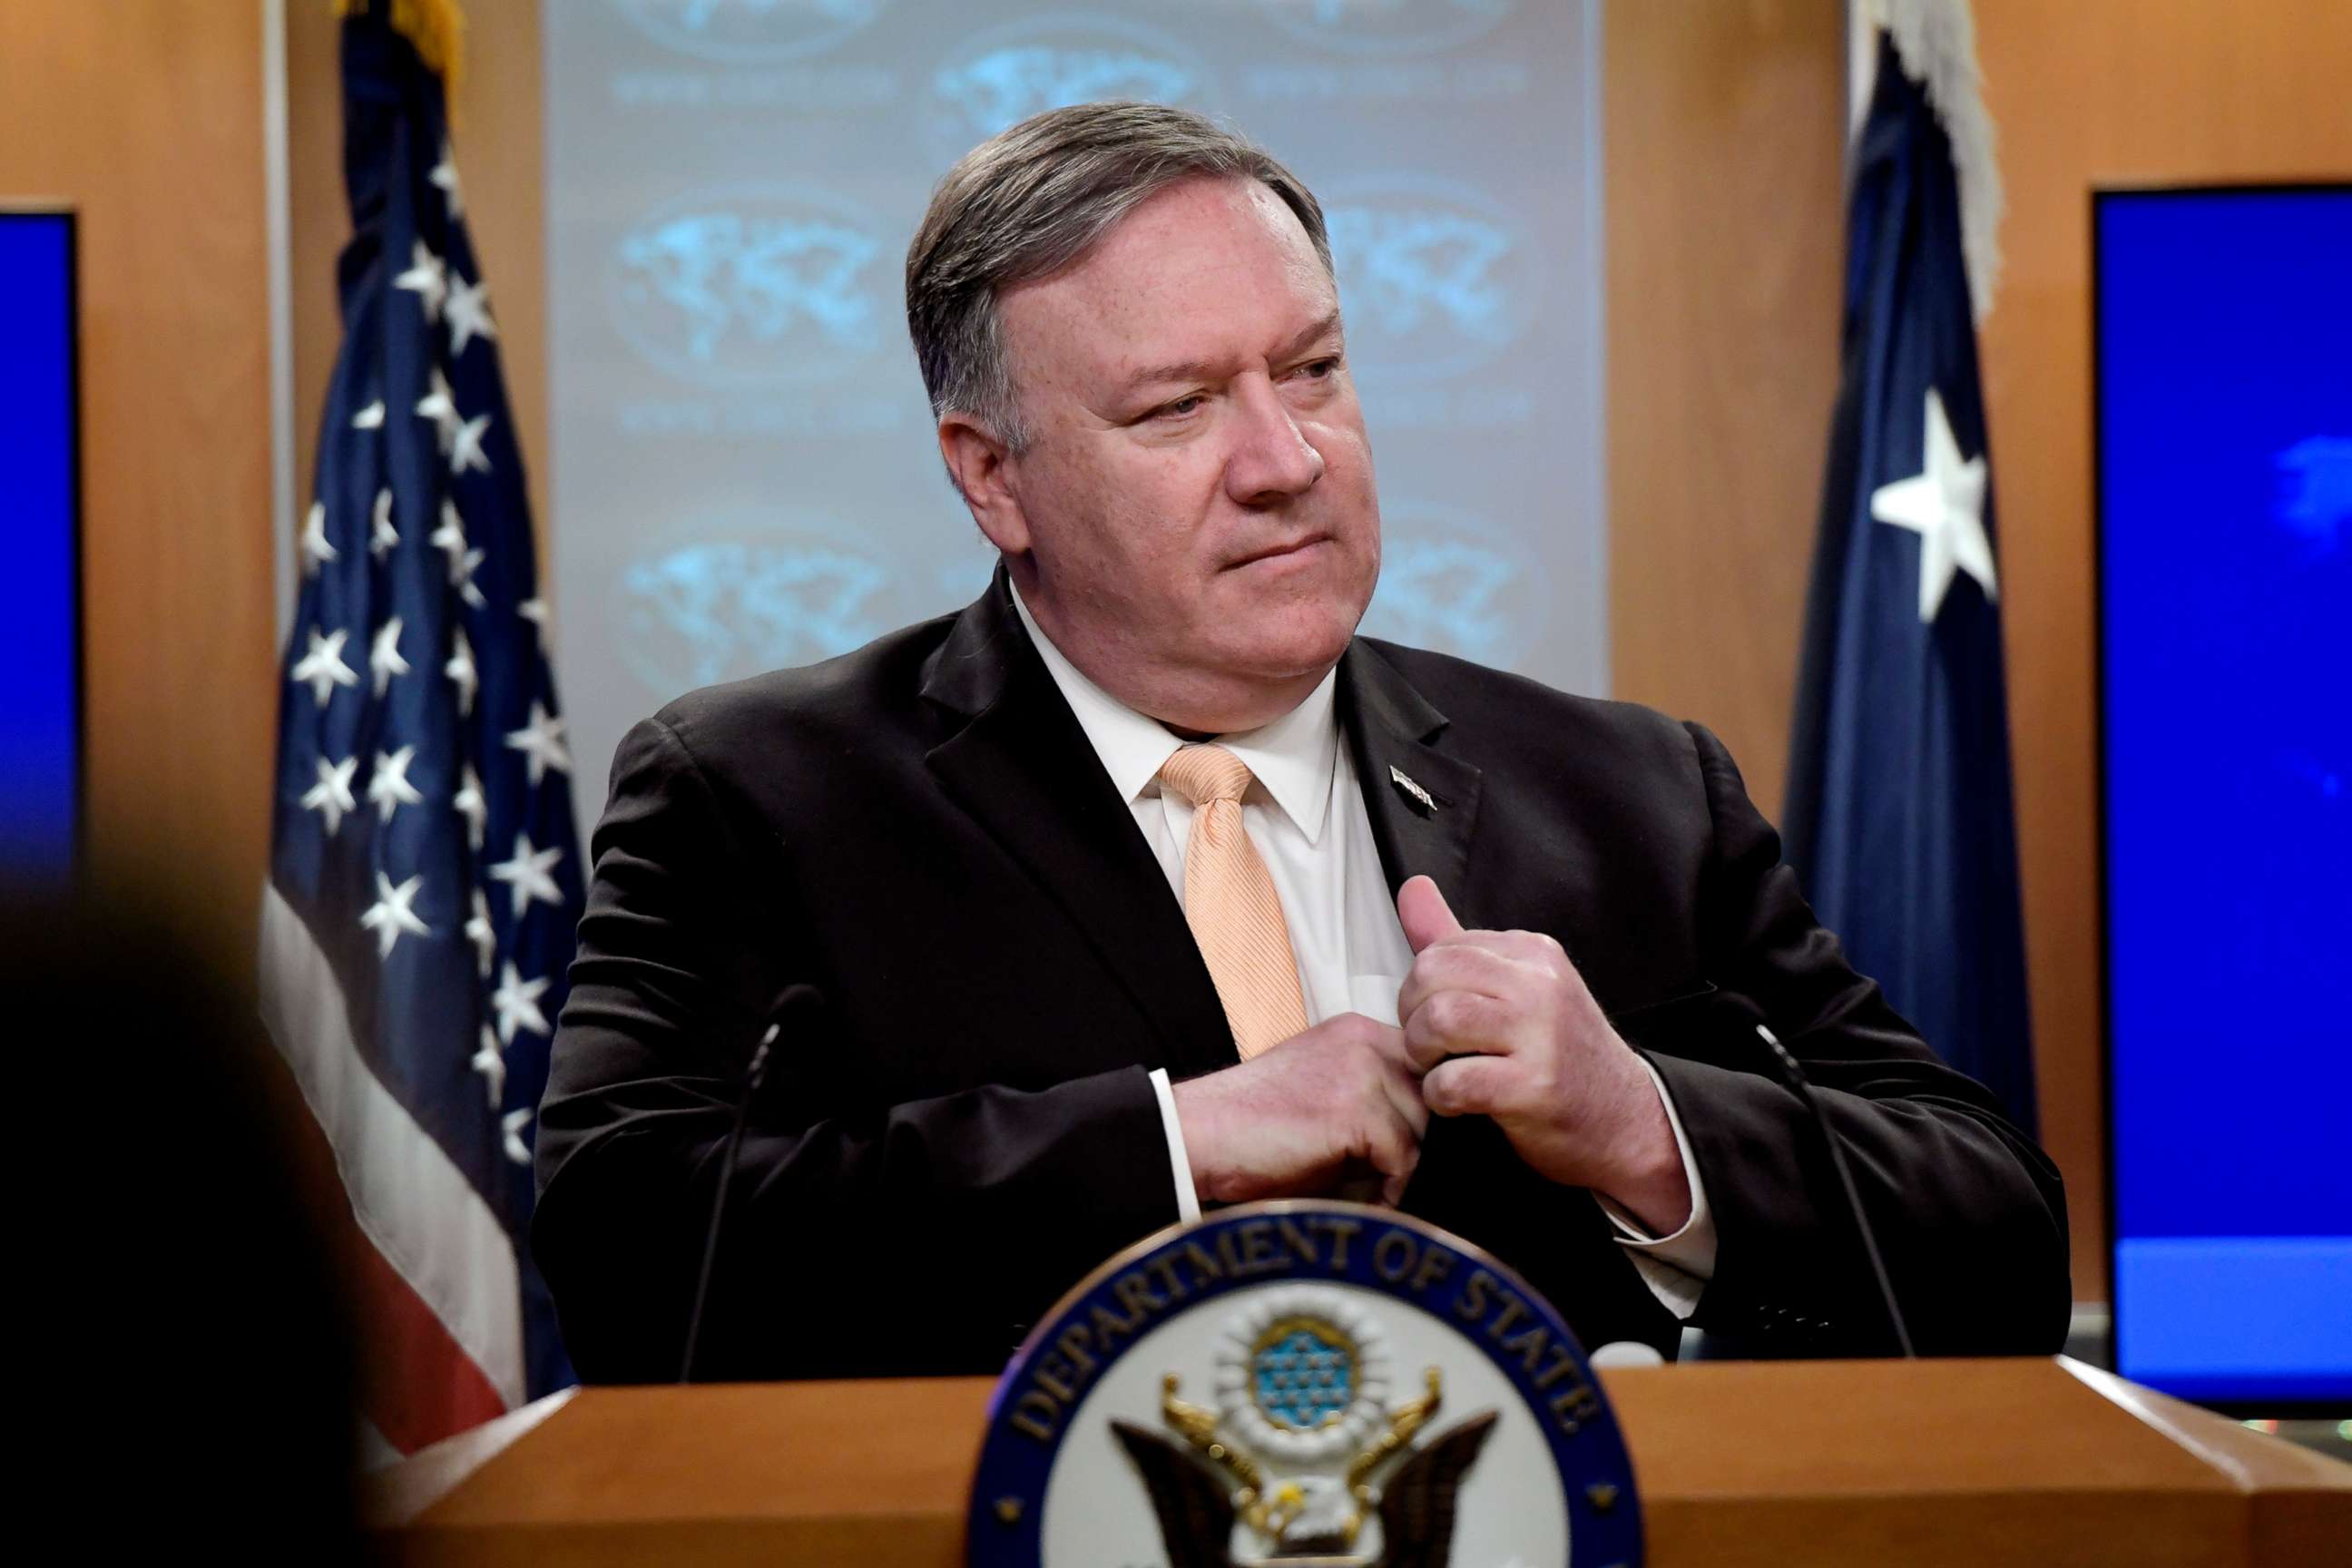 PHOTO: Secretary of State Mike Pompeo speaks during a news conference, April 22, 2019, at the Department of State in Washington, D.C.